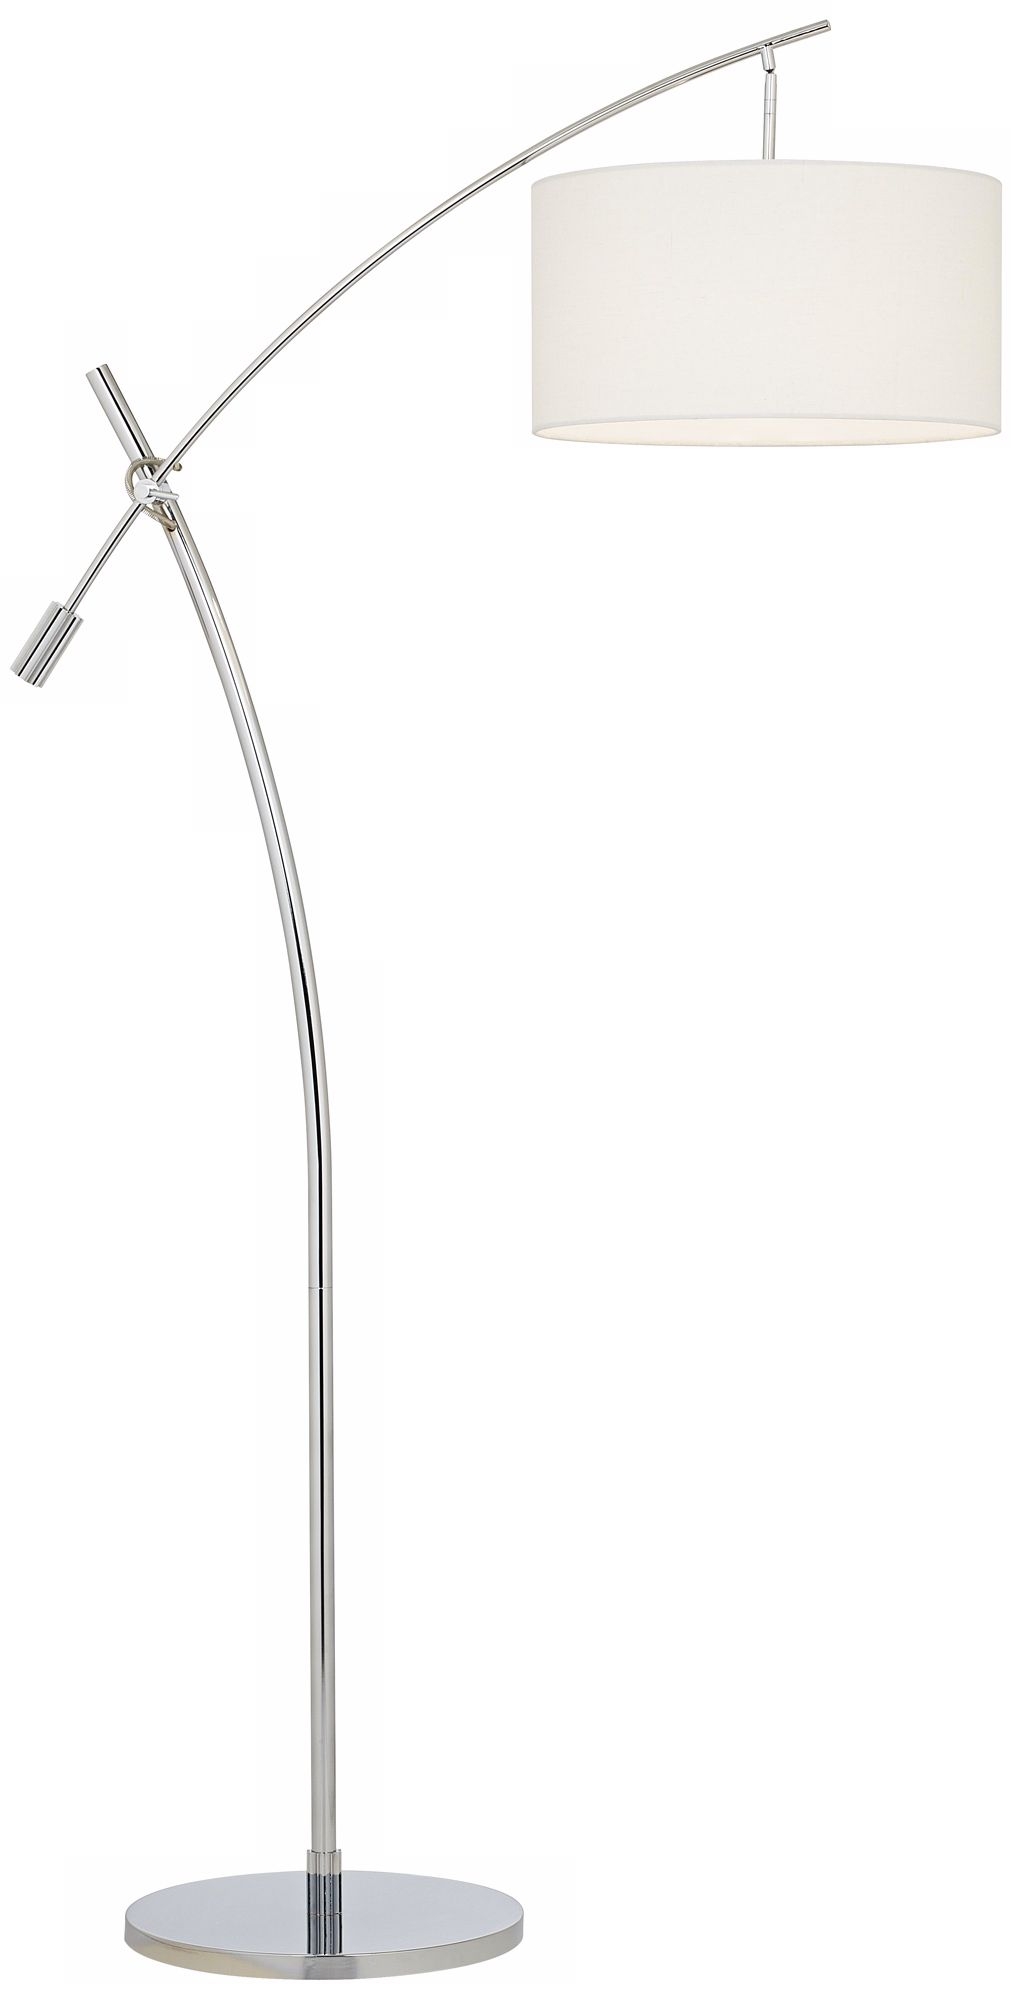 Chrome Boom Arc Floor Lamp with Linen Shade - Image 0